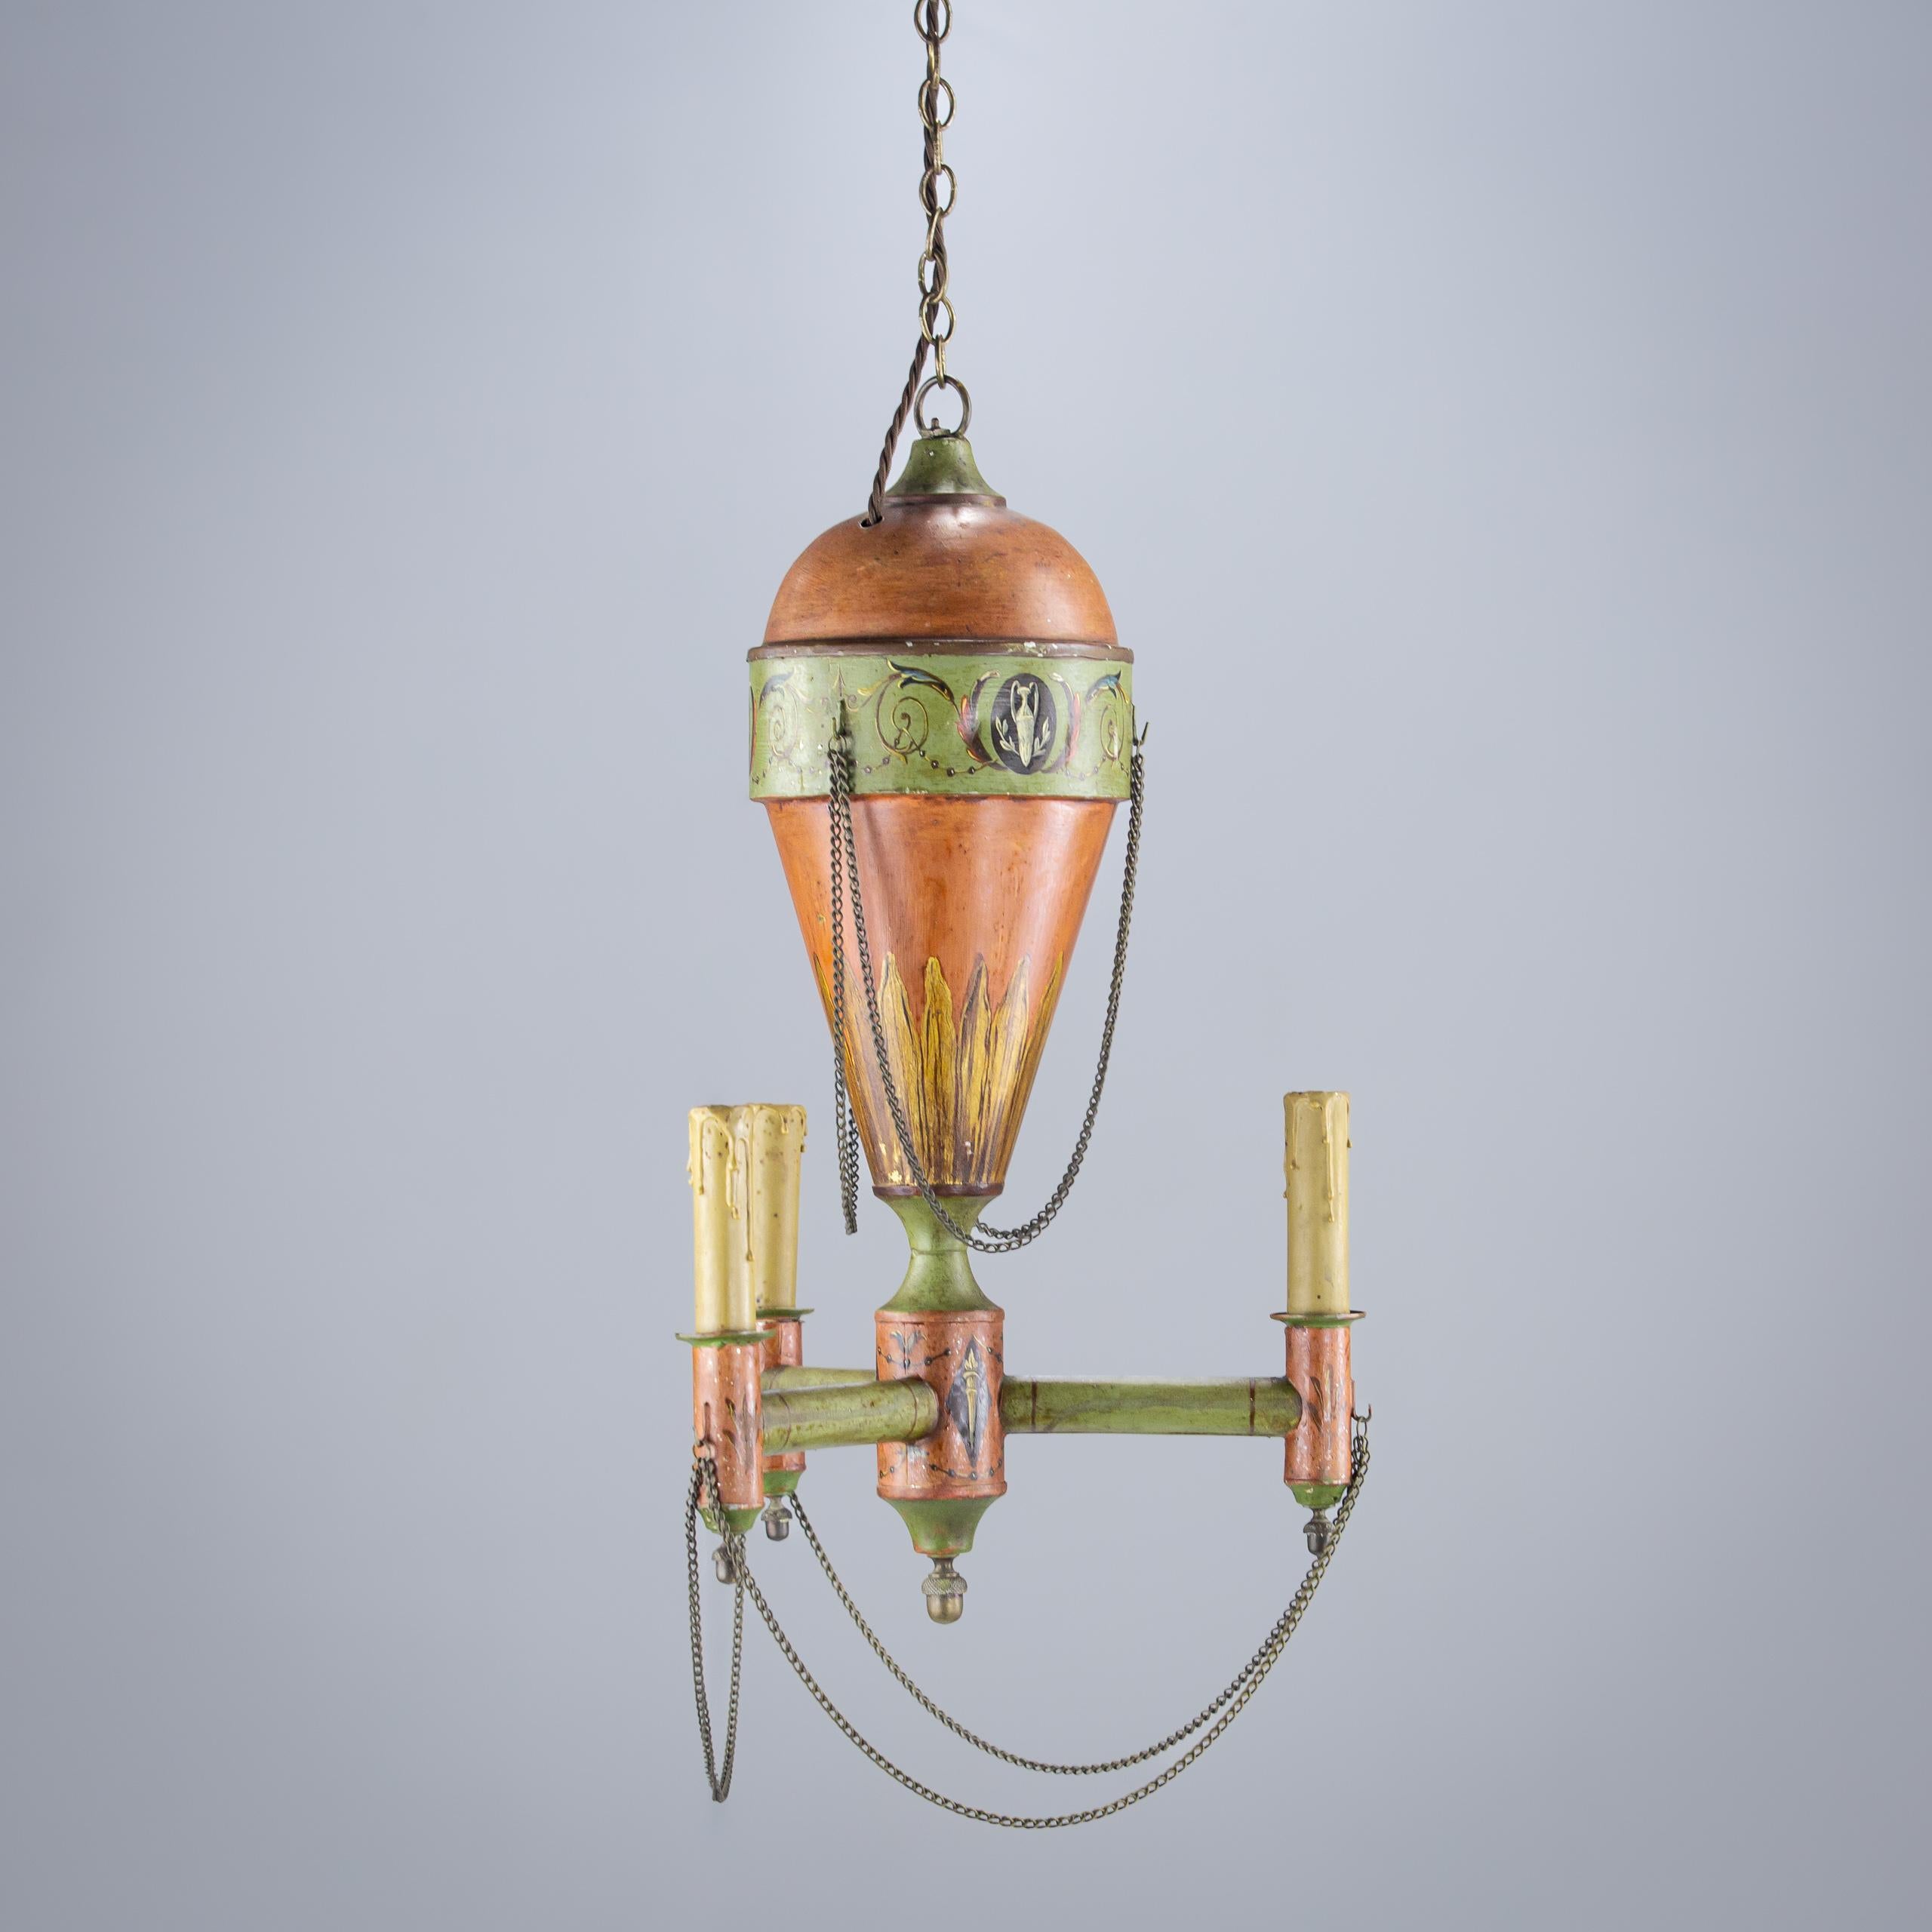 Tole Piente Chandelier in the form of a Hot Air Balloon. Crown Line  and drop line as patinated brass chain. original paint.

France, Circa 1930.

Rewired using antique style flex cord.